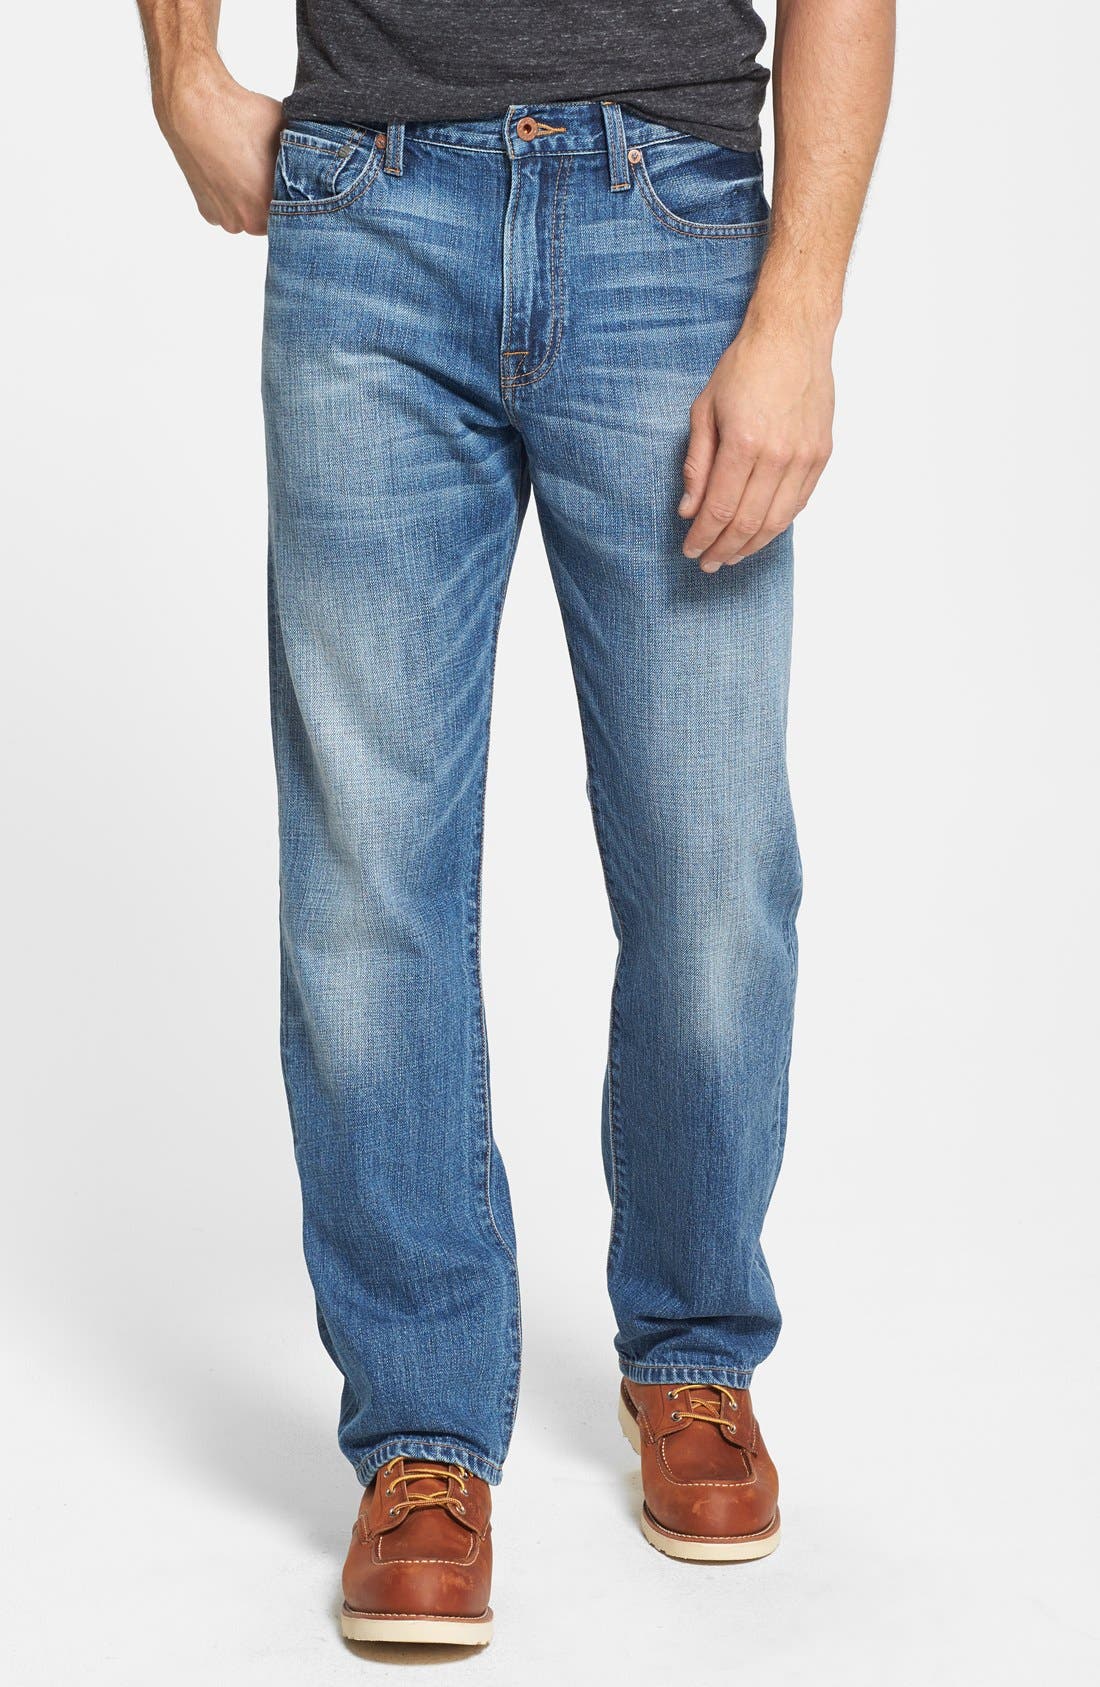 lucky brand jeans mens 329 classic straight